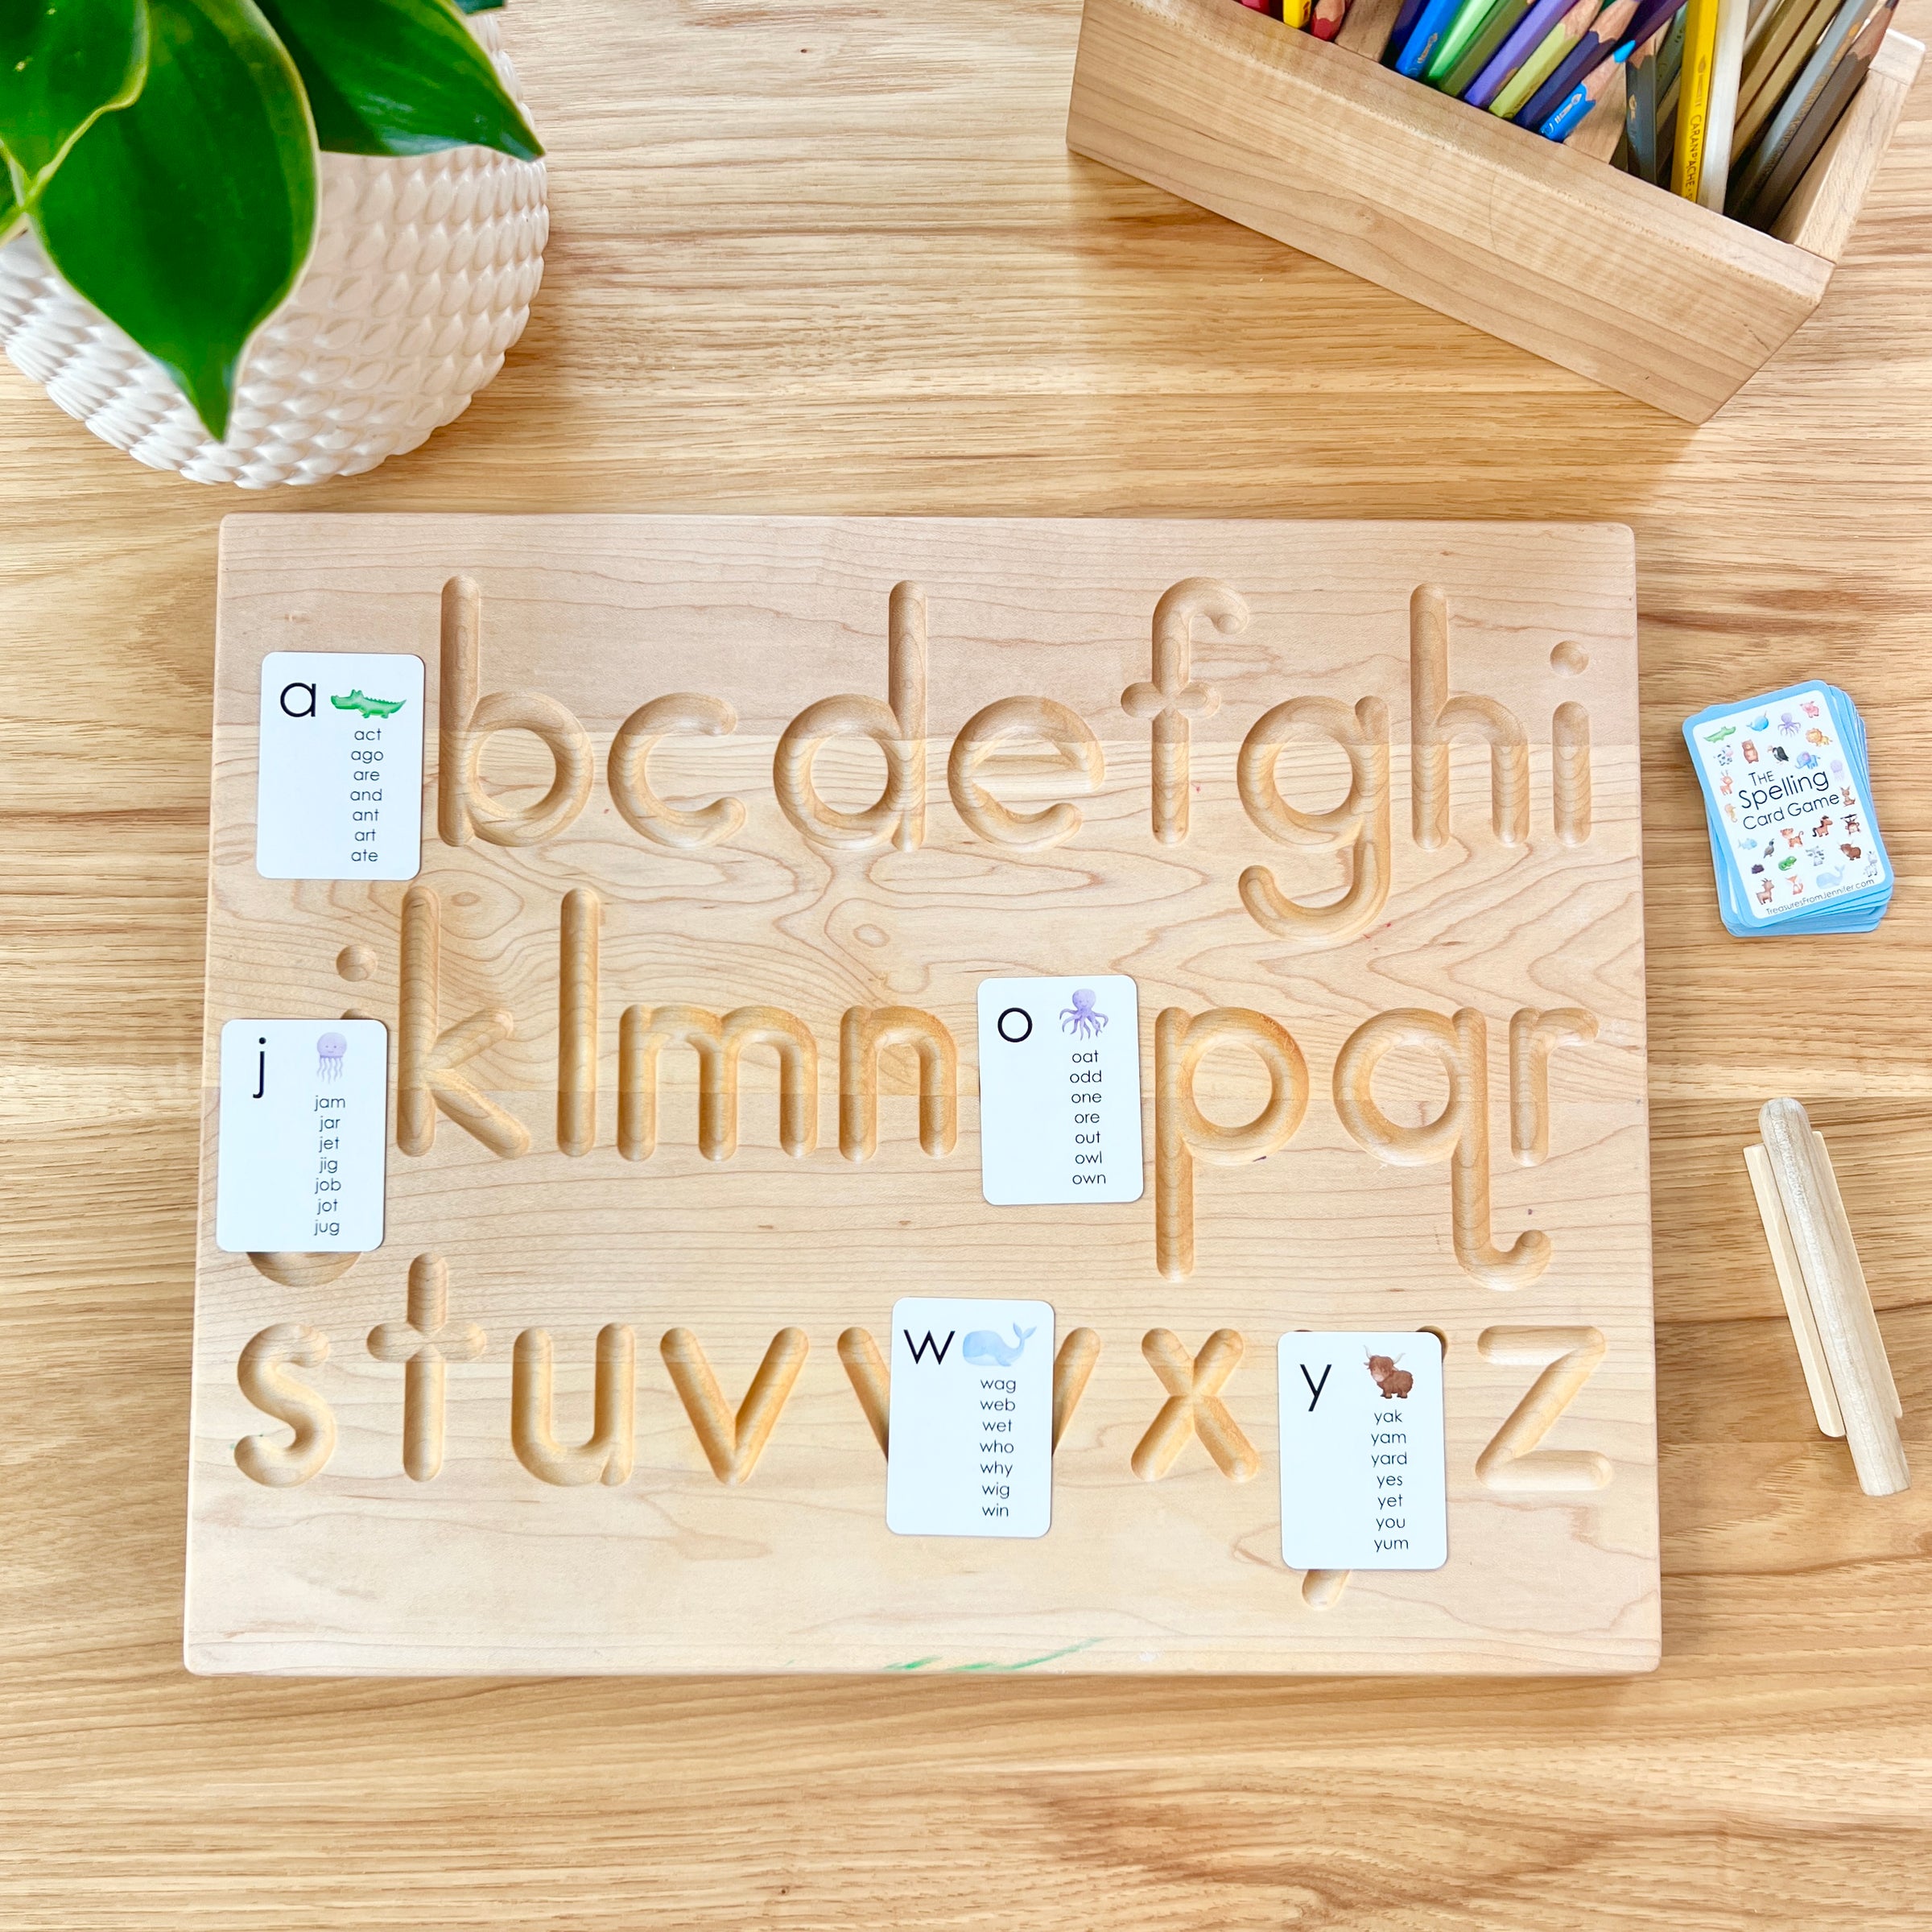 Wooden Wooden Alphabet Tracing Board Writing Tools with Pencil